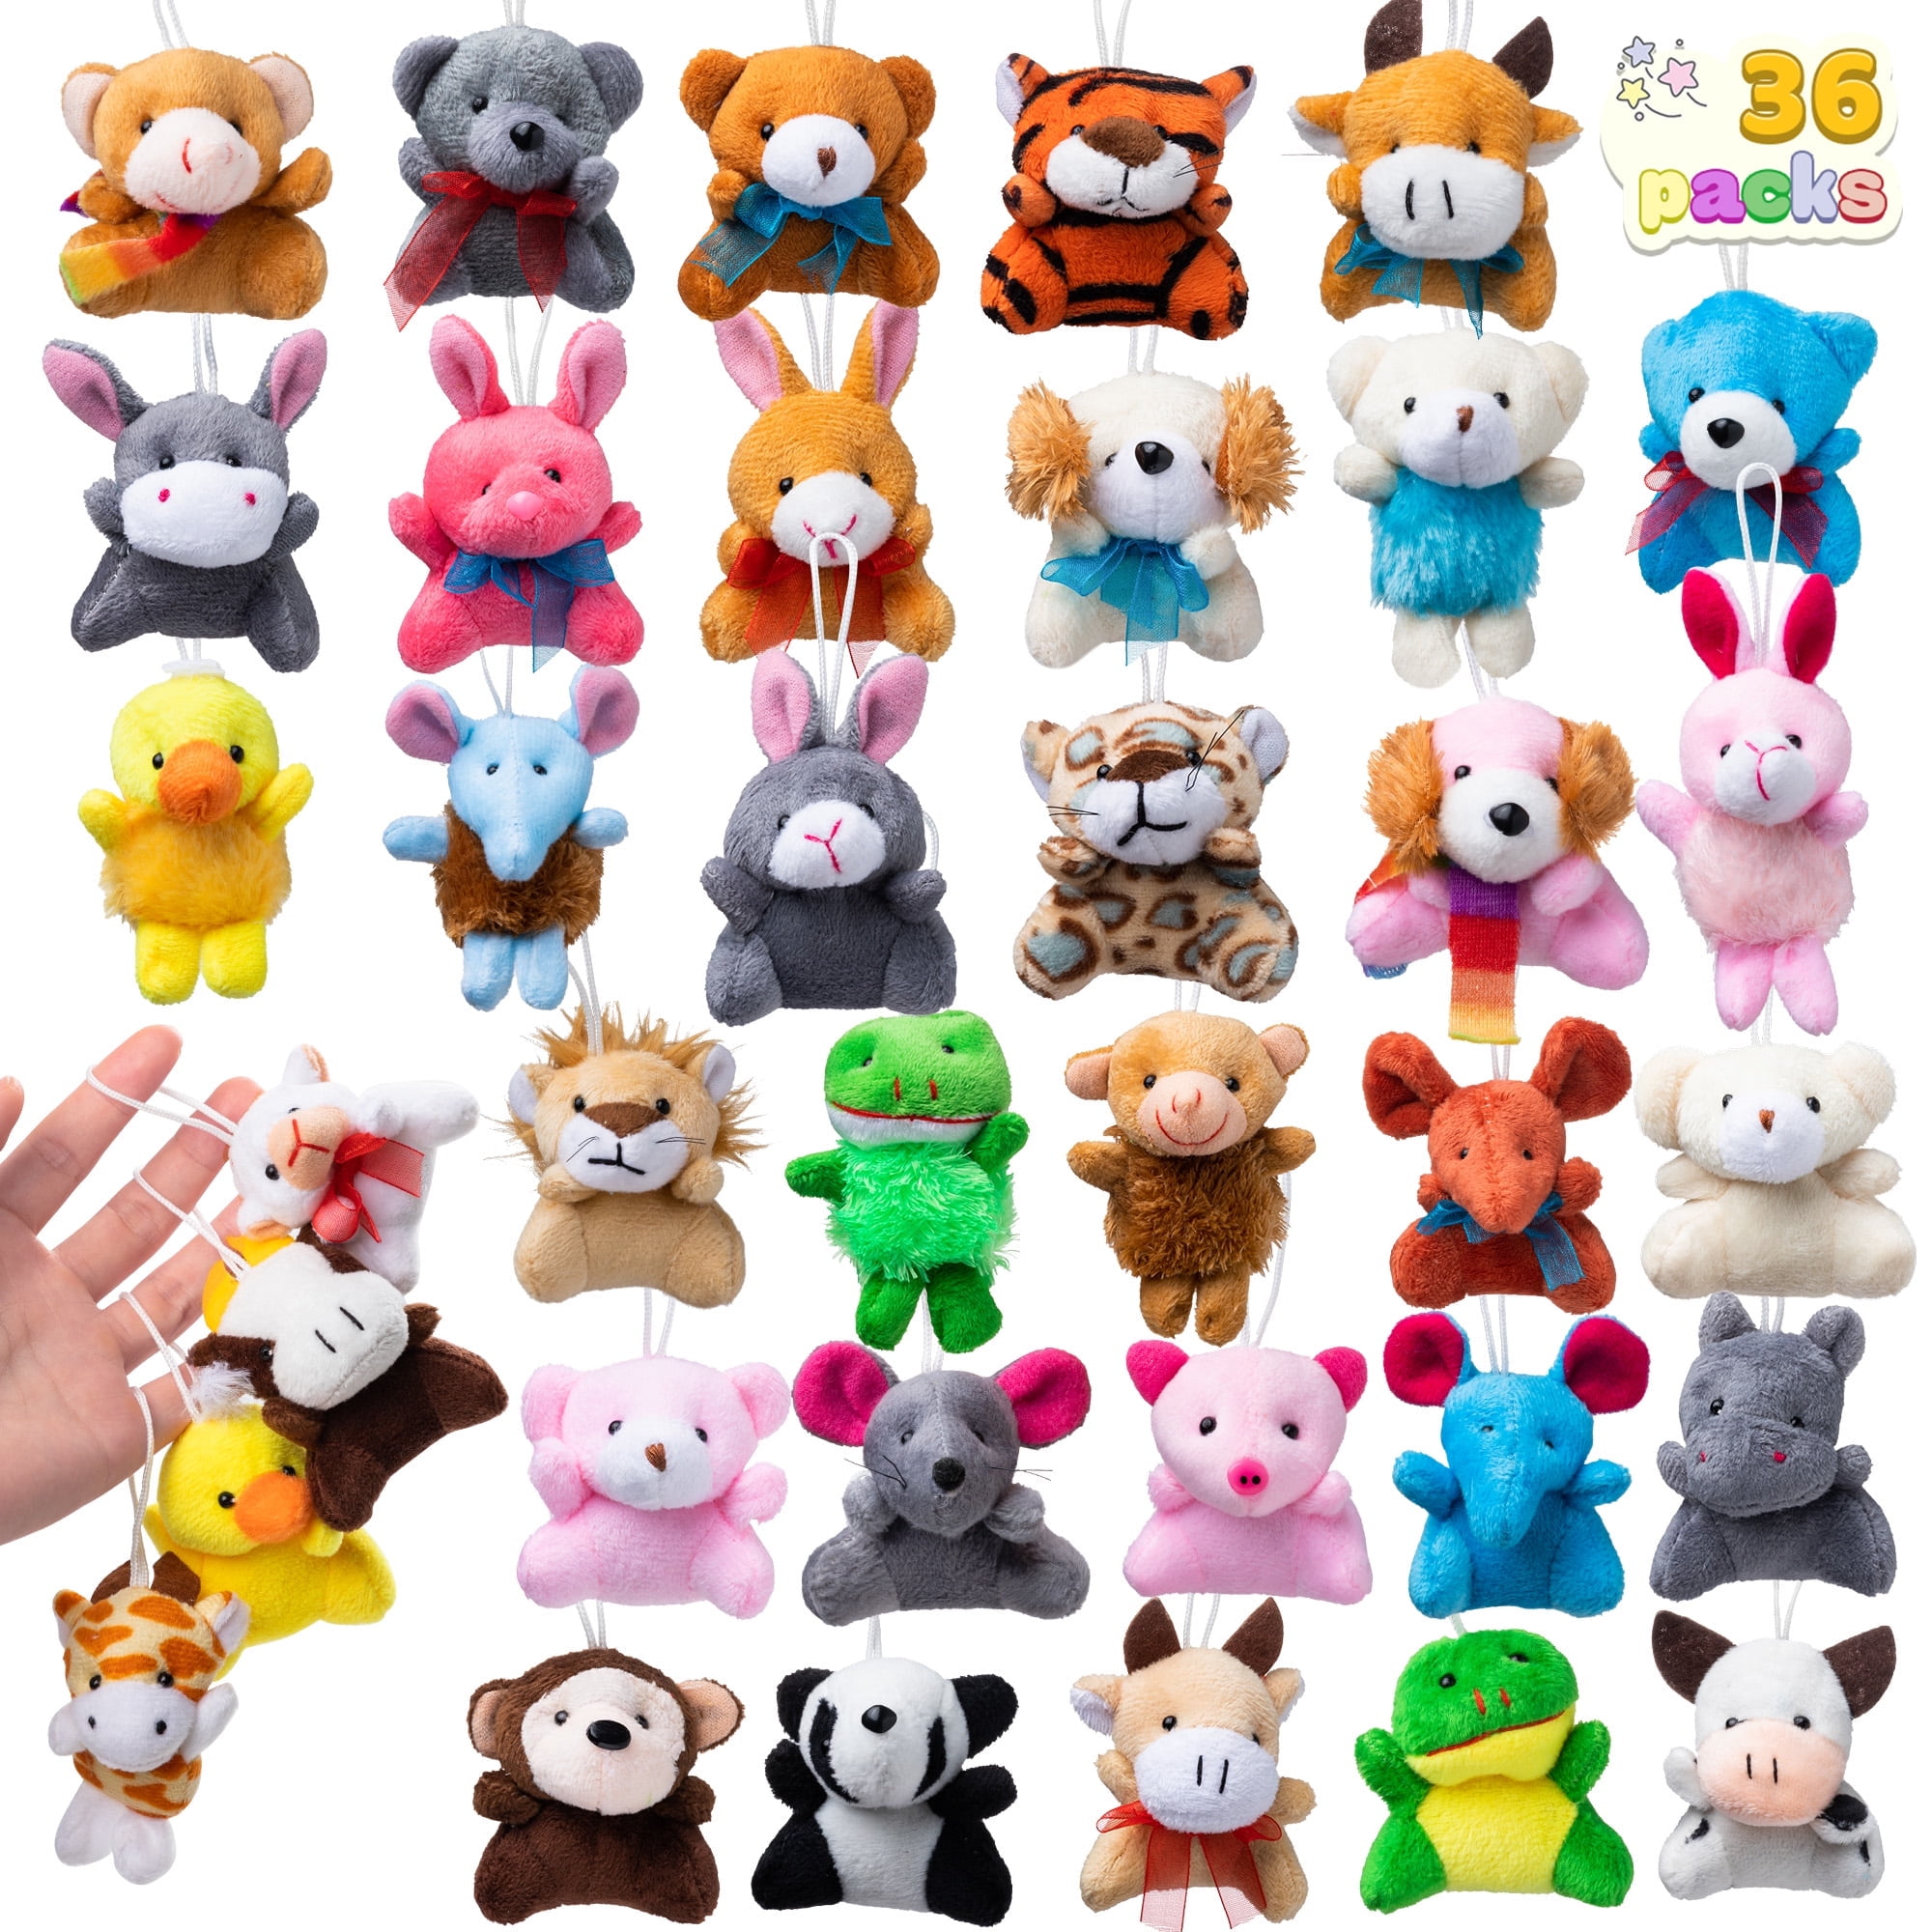 Syncfun 24 Pcs Mini Animal Plush Toy Party Favors, Stuffed Animals Pinata  Fillers for Kids, Carnival Prizes, School Gifts, Birthday Party Supplies 